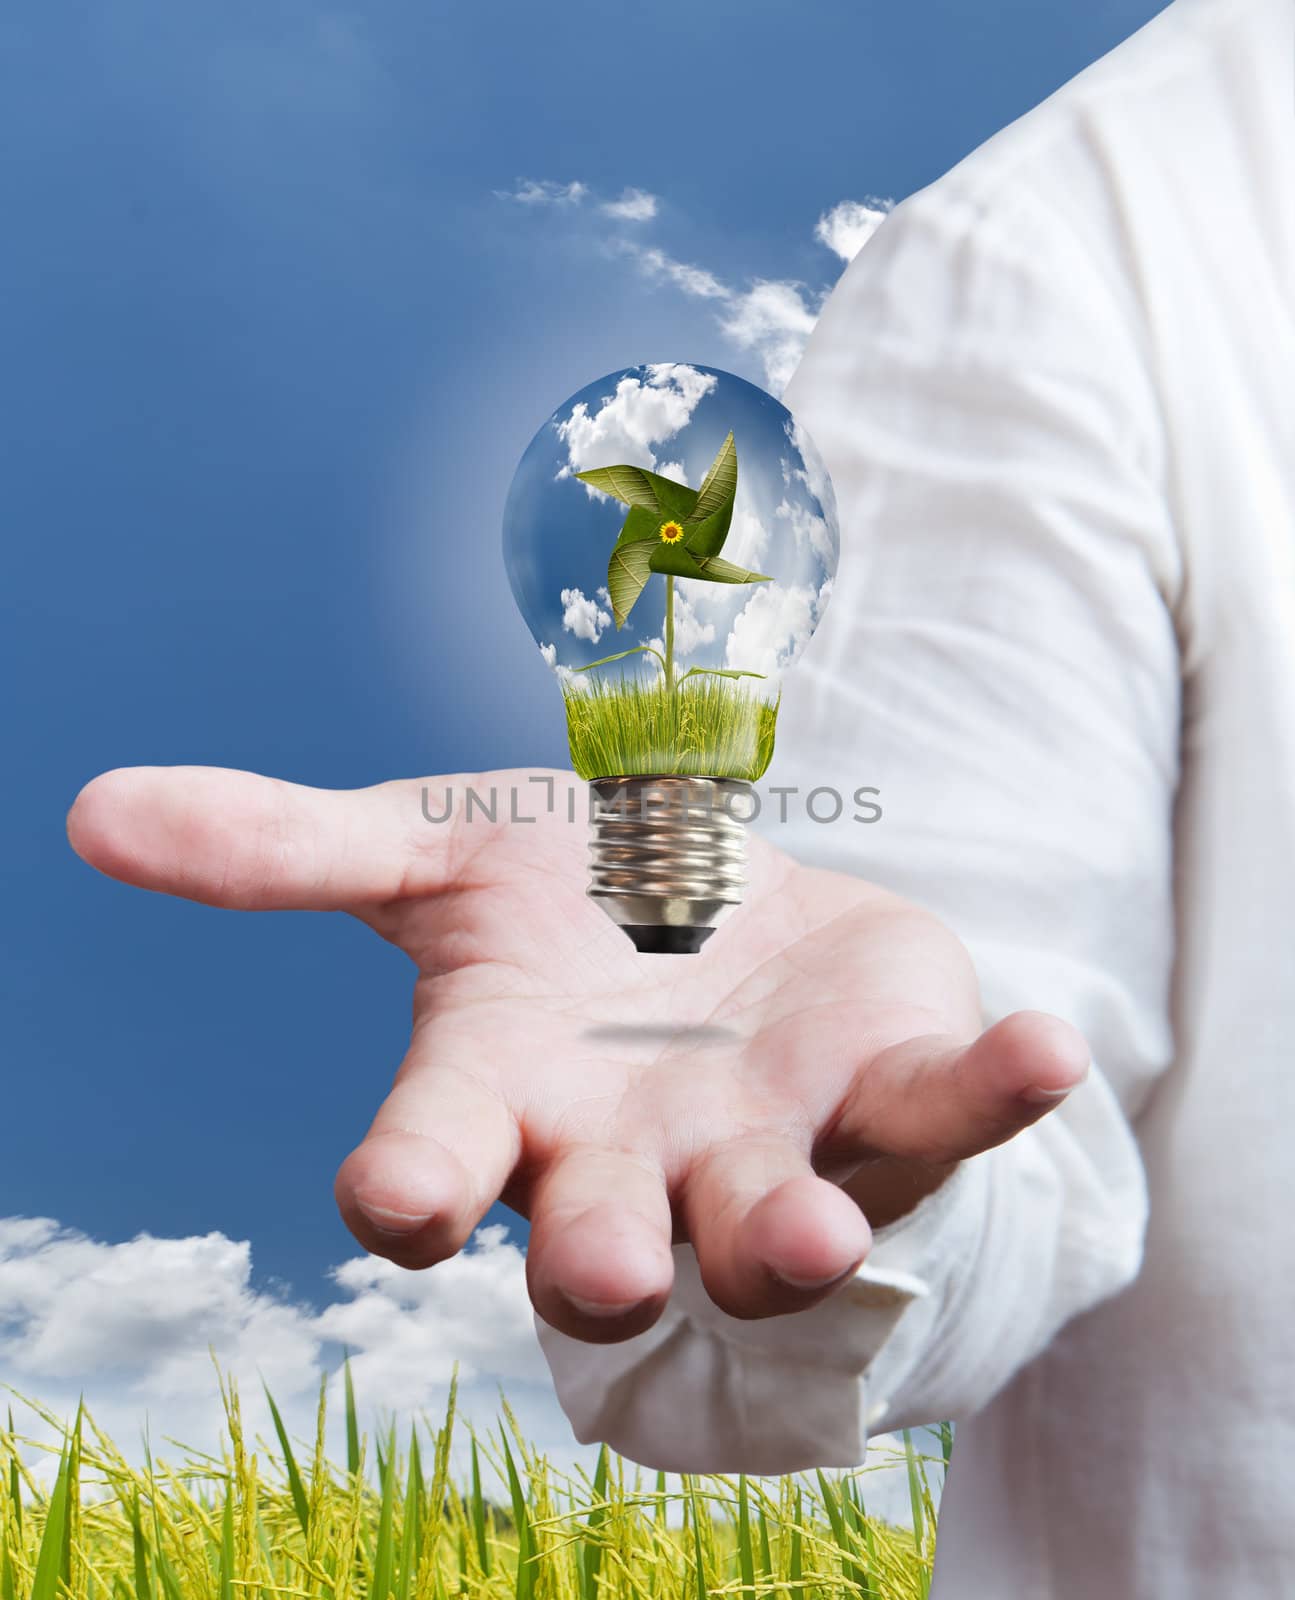 paddle , windmill and blue sky in light bulb on hand by Suriyaphoto